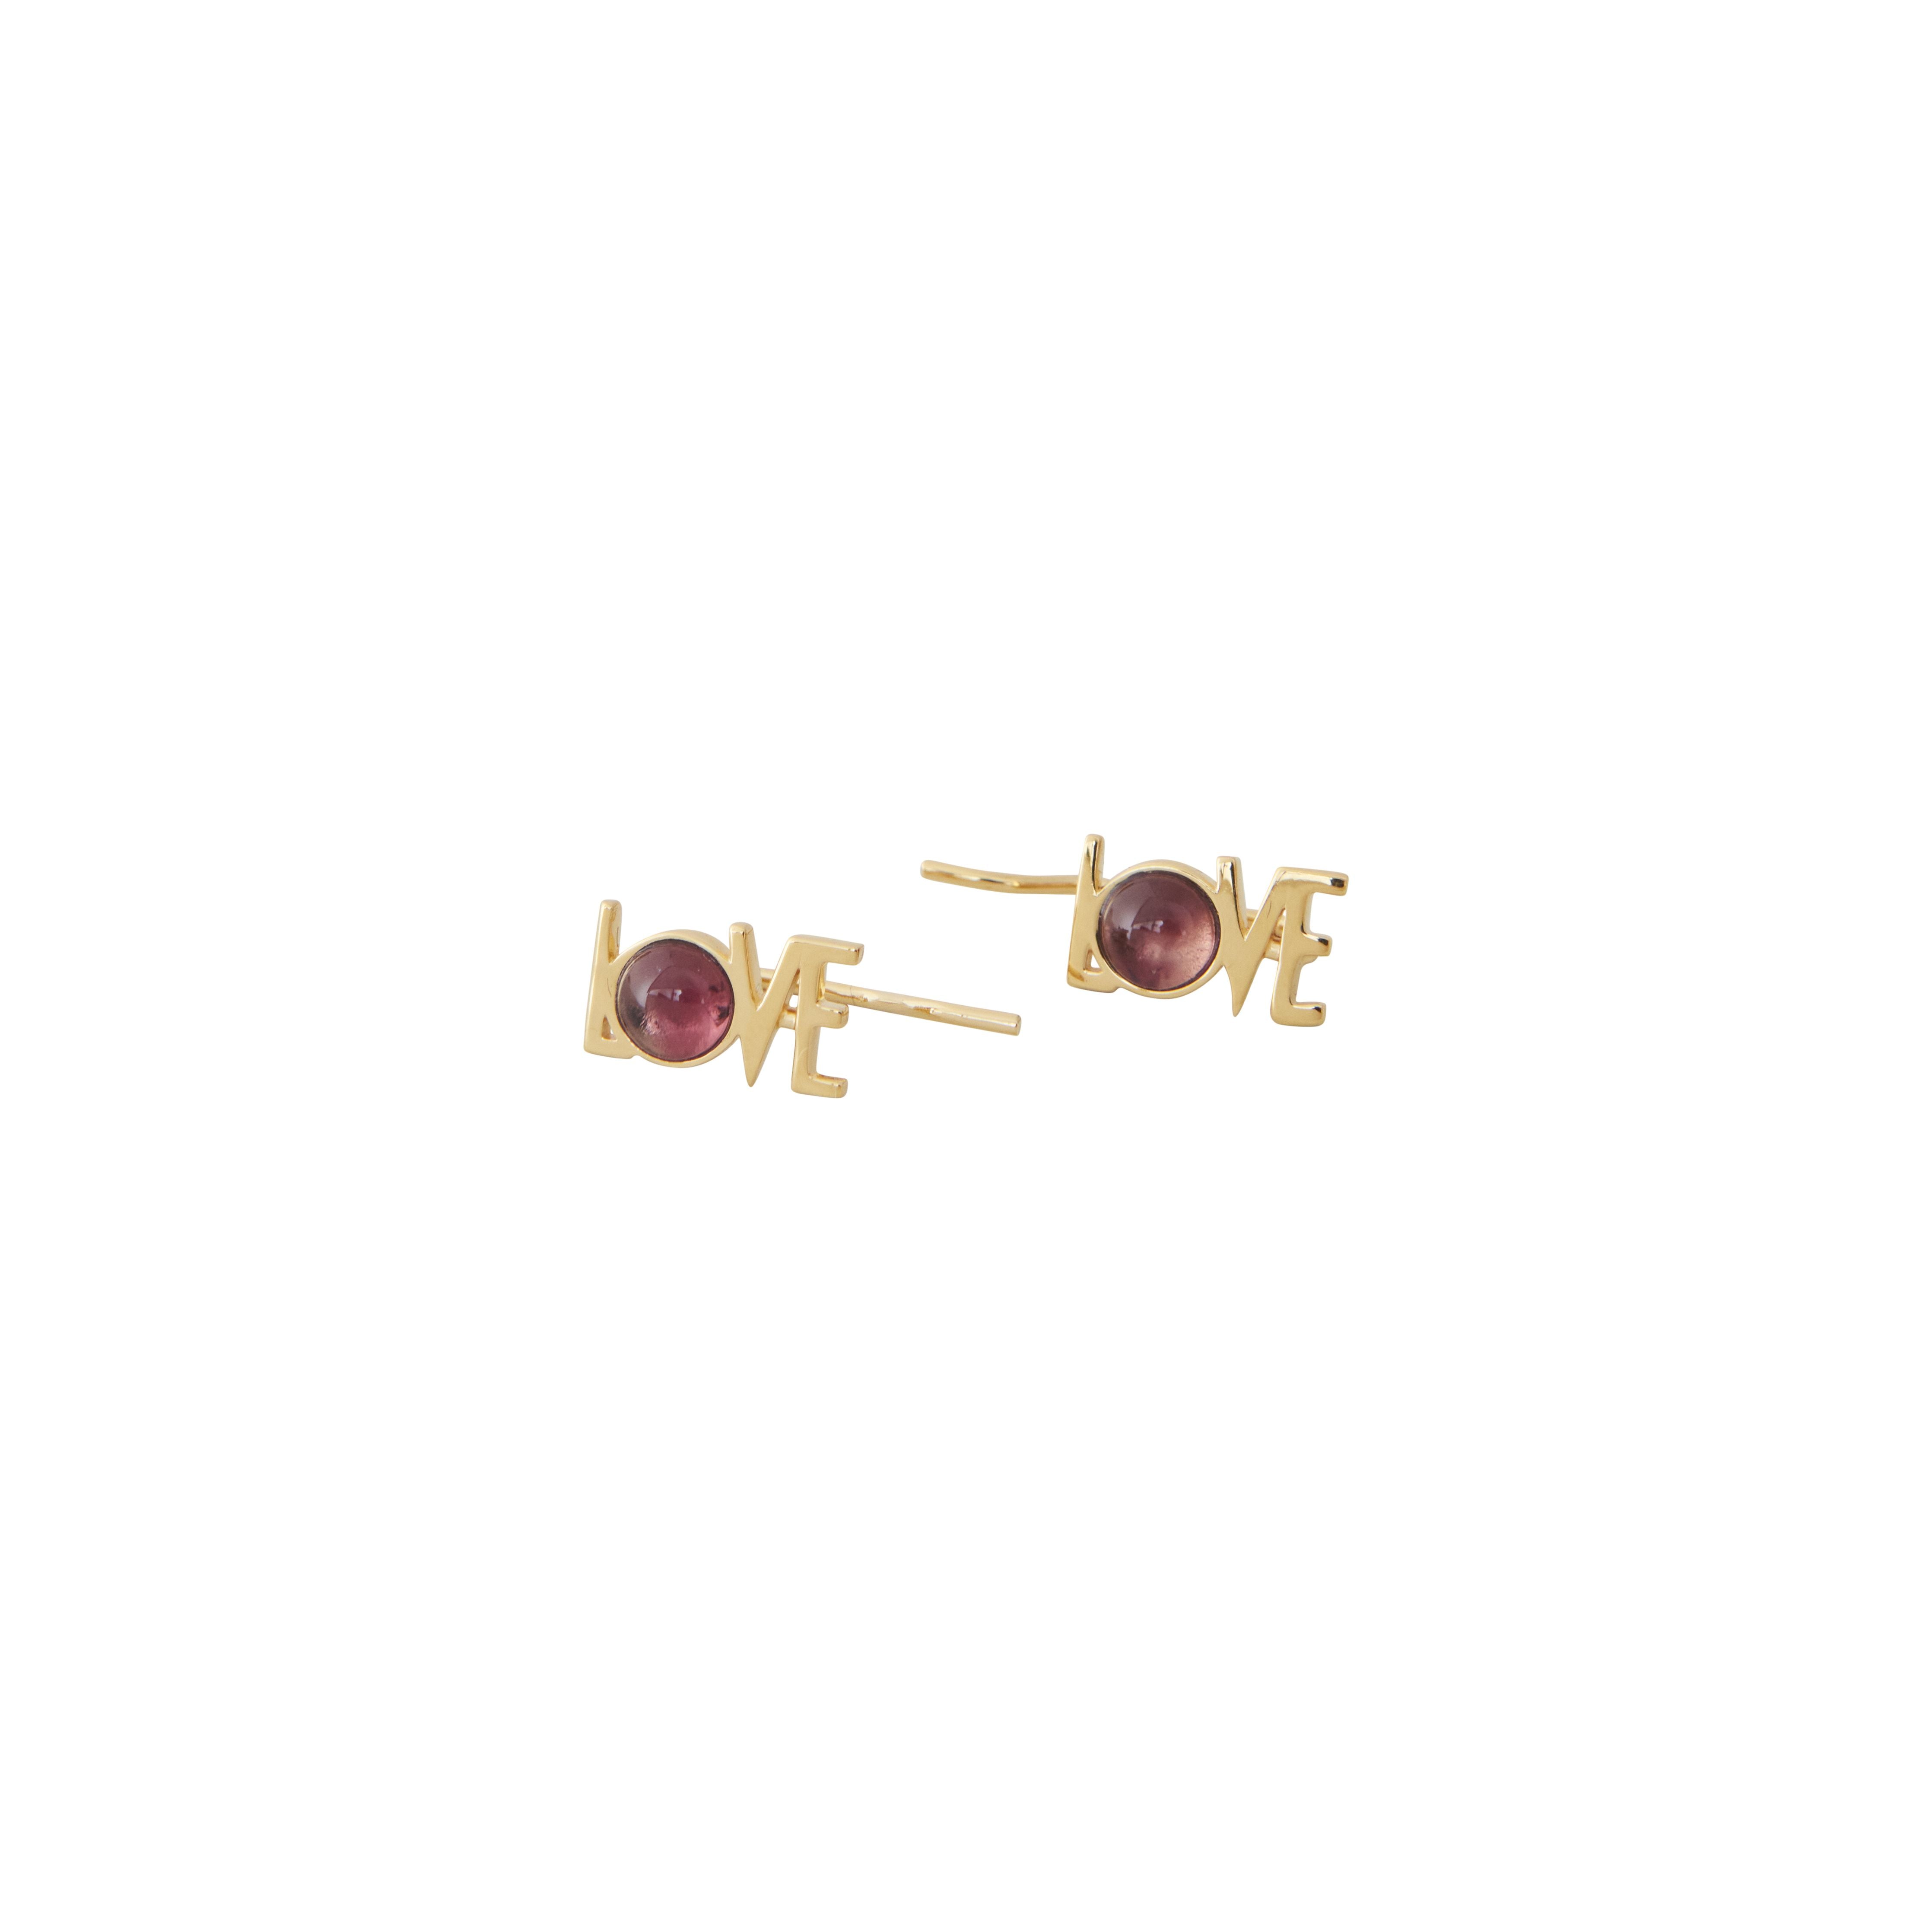 Design Letters Great Love Earrings Set Of 2 18k Gold Plated, Amethyst Violet